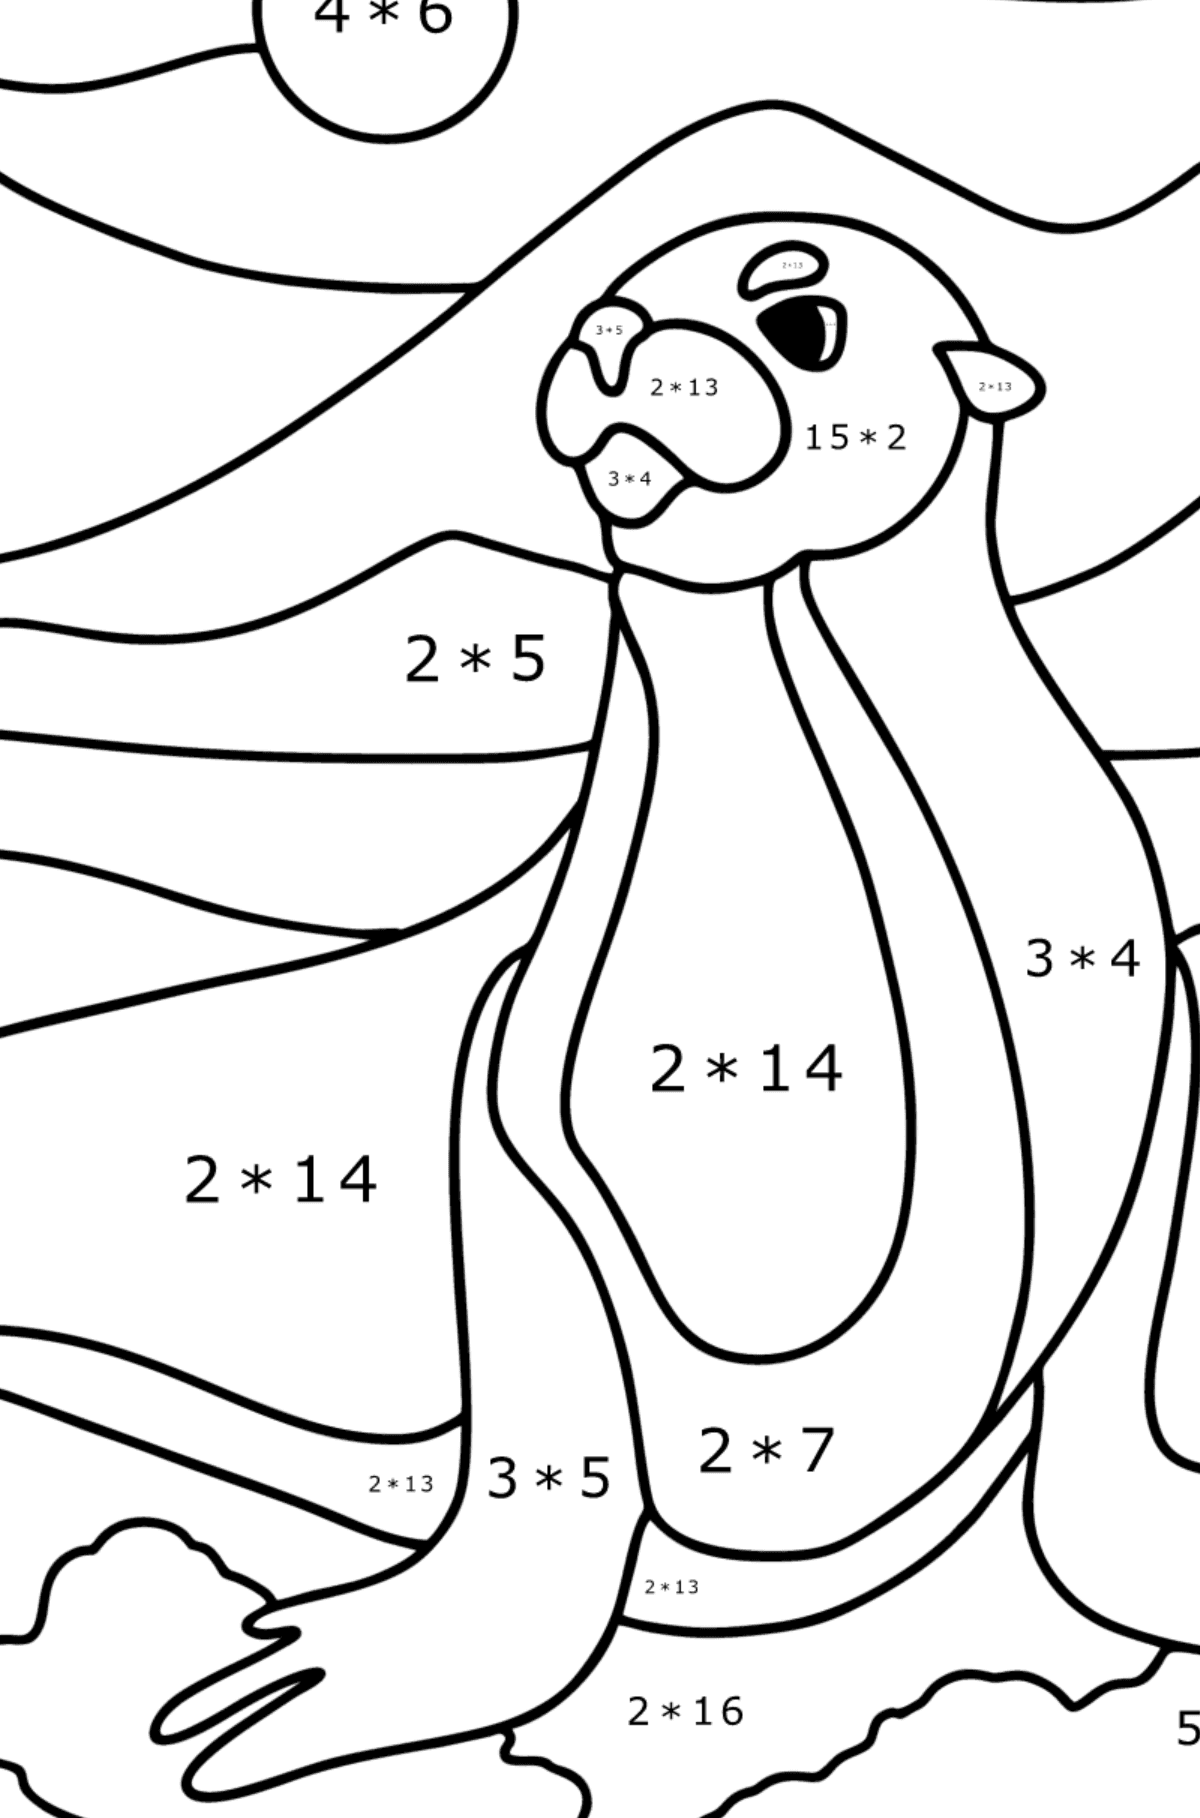 Sea lion coloring page - Math Coloring - Multiplication for Kids